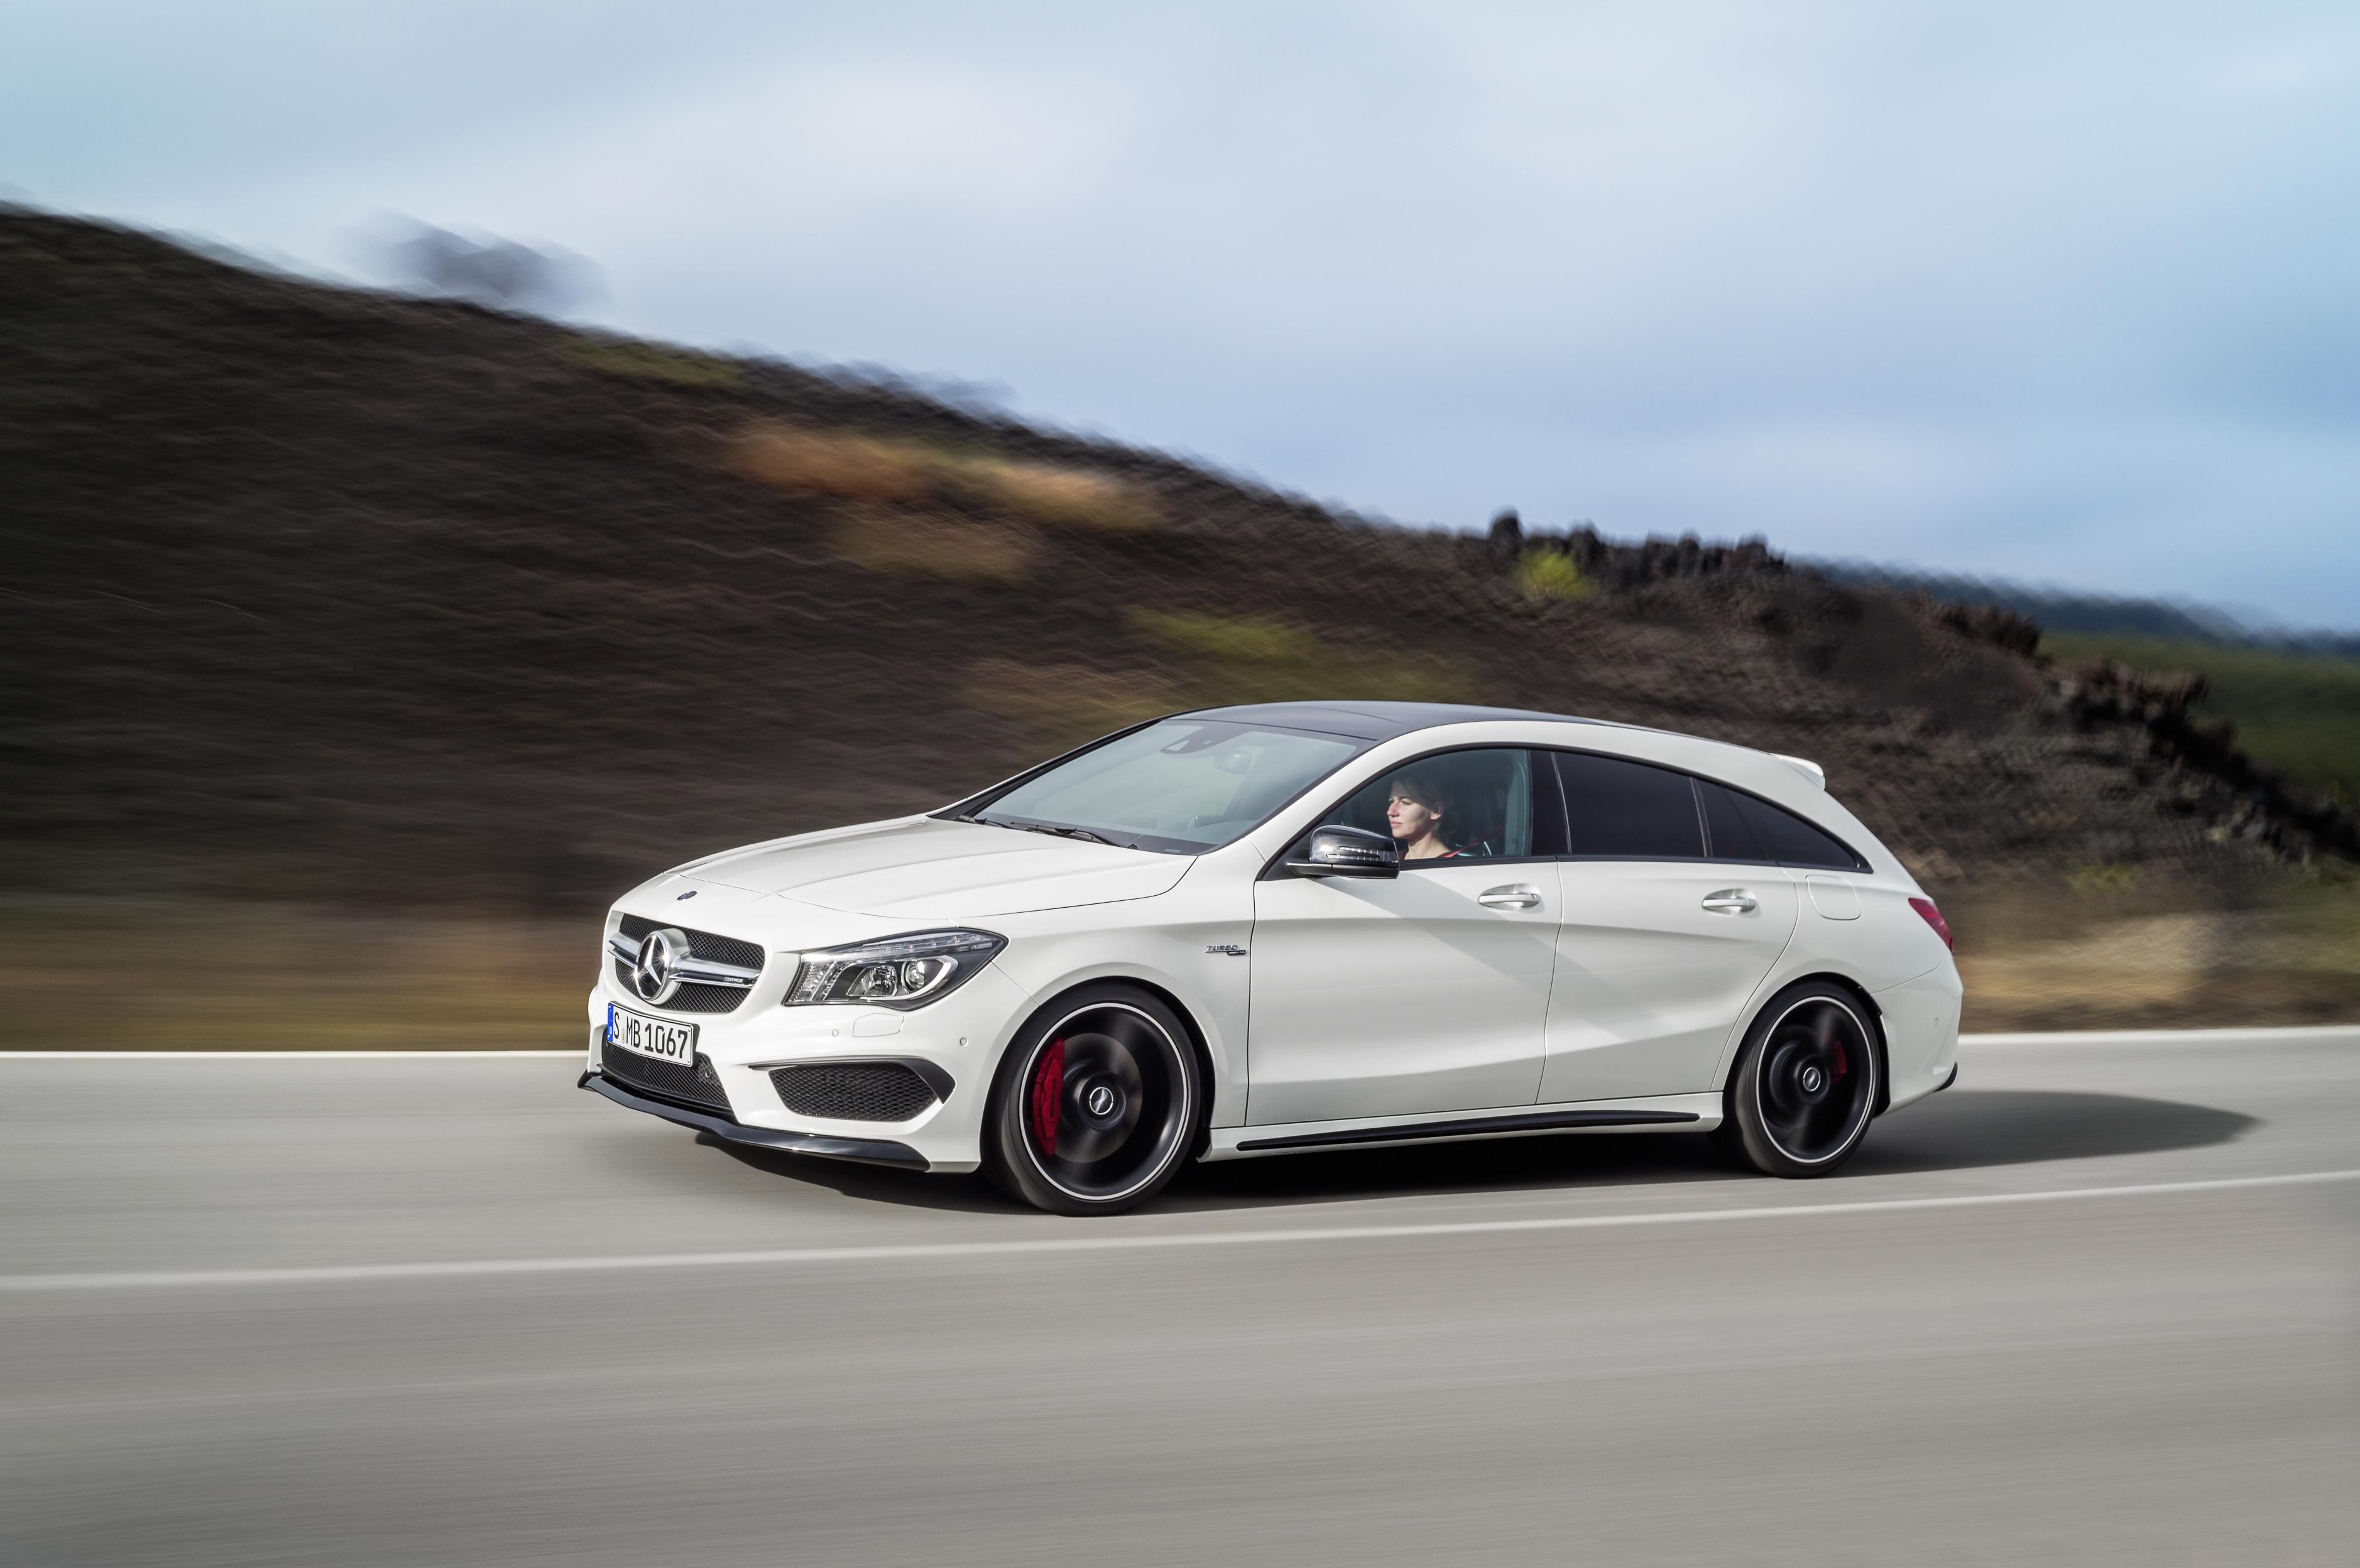 2015 Mercedes-Benz CLA 45 AMG, the Epitaph of Power and Class